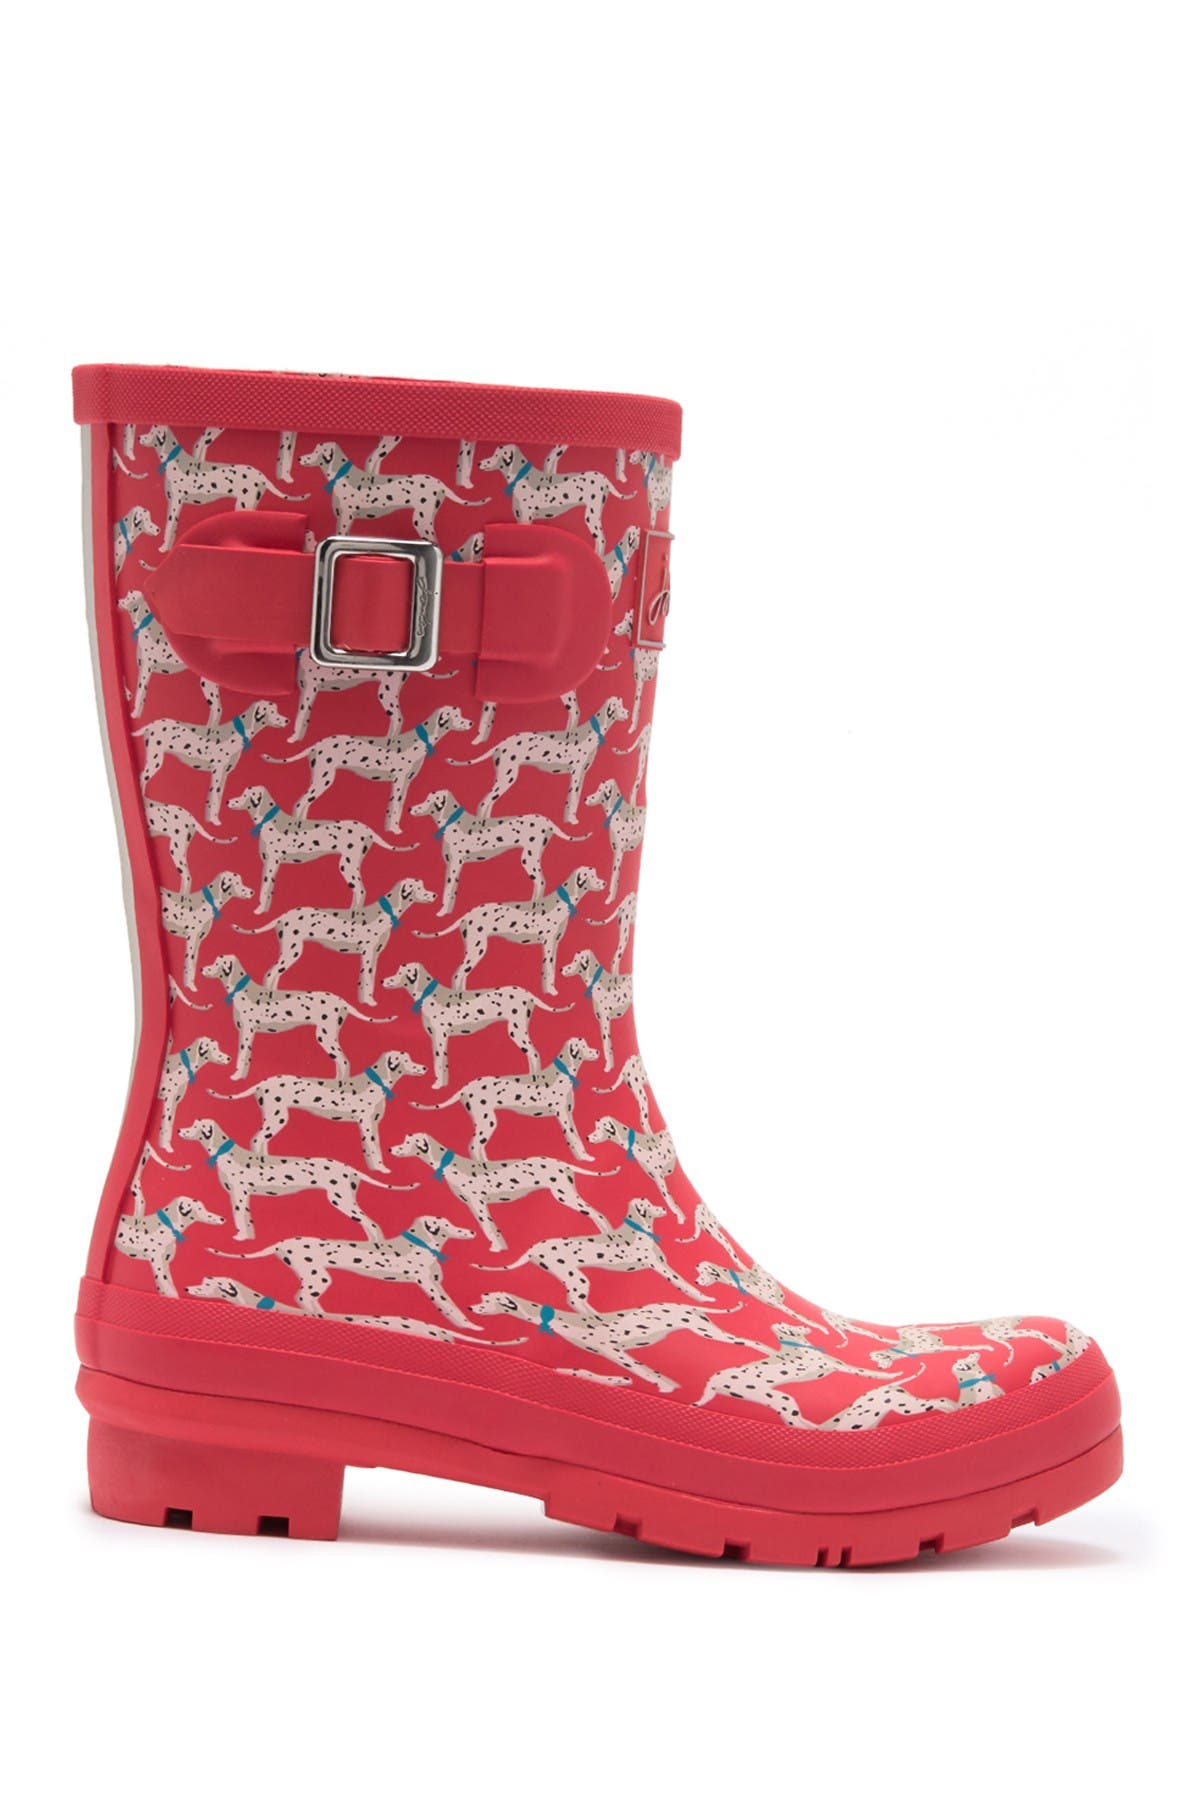 Joules | Molly Welly Rain Boot | Nordstrom Rack